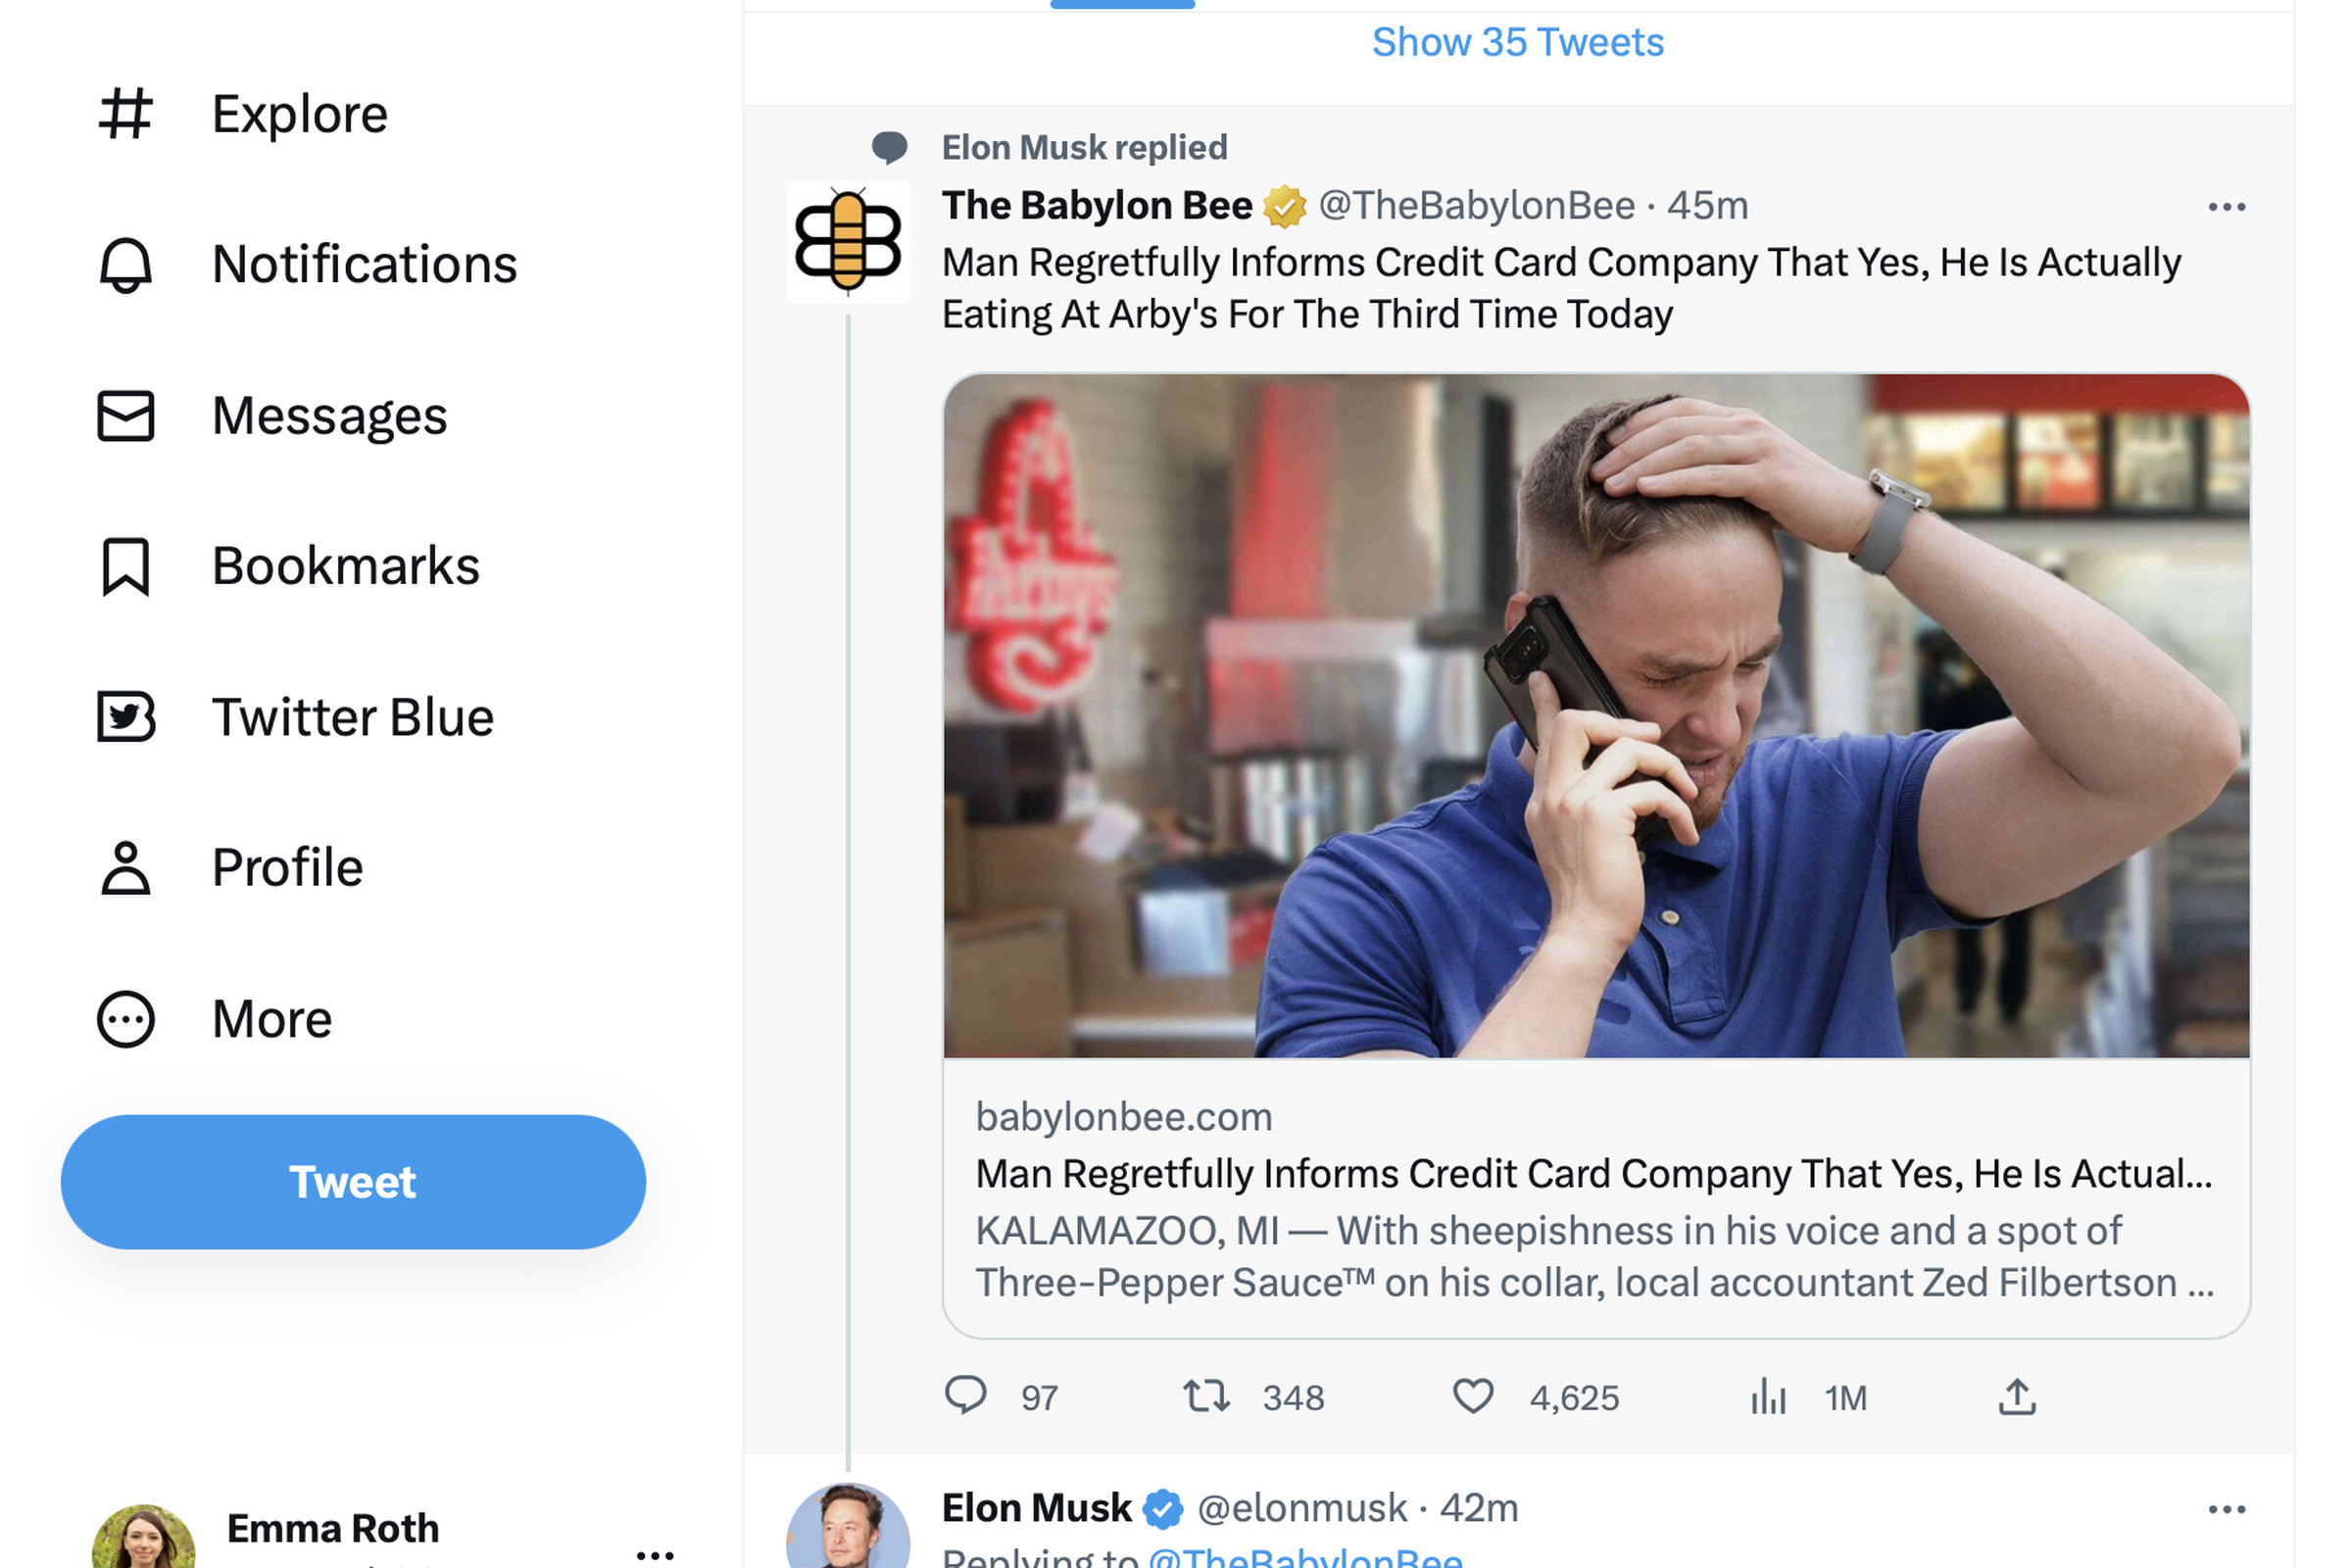 A screenshot showing a tweet from Elon Musk in Twitter’s For You feed